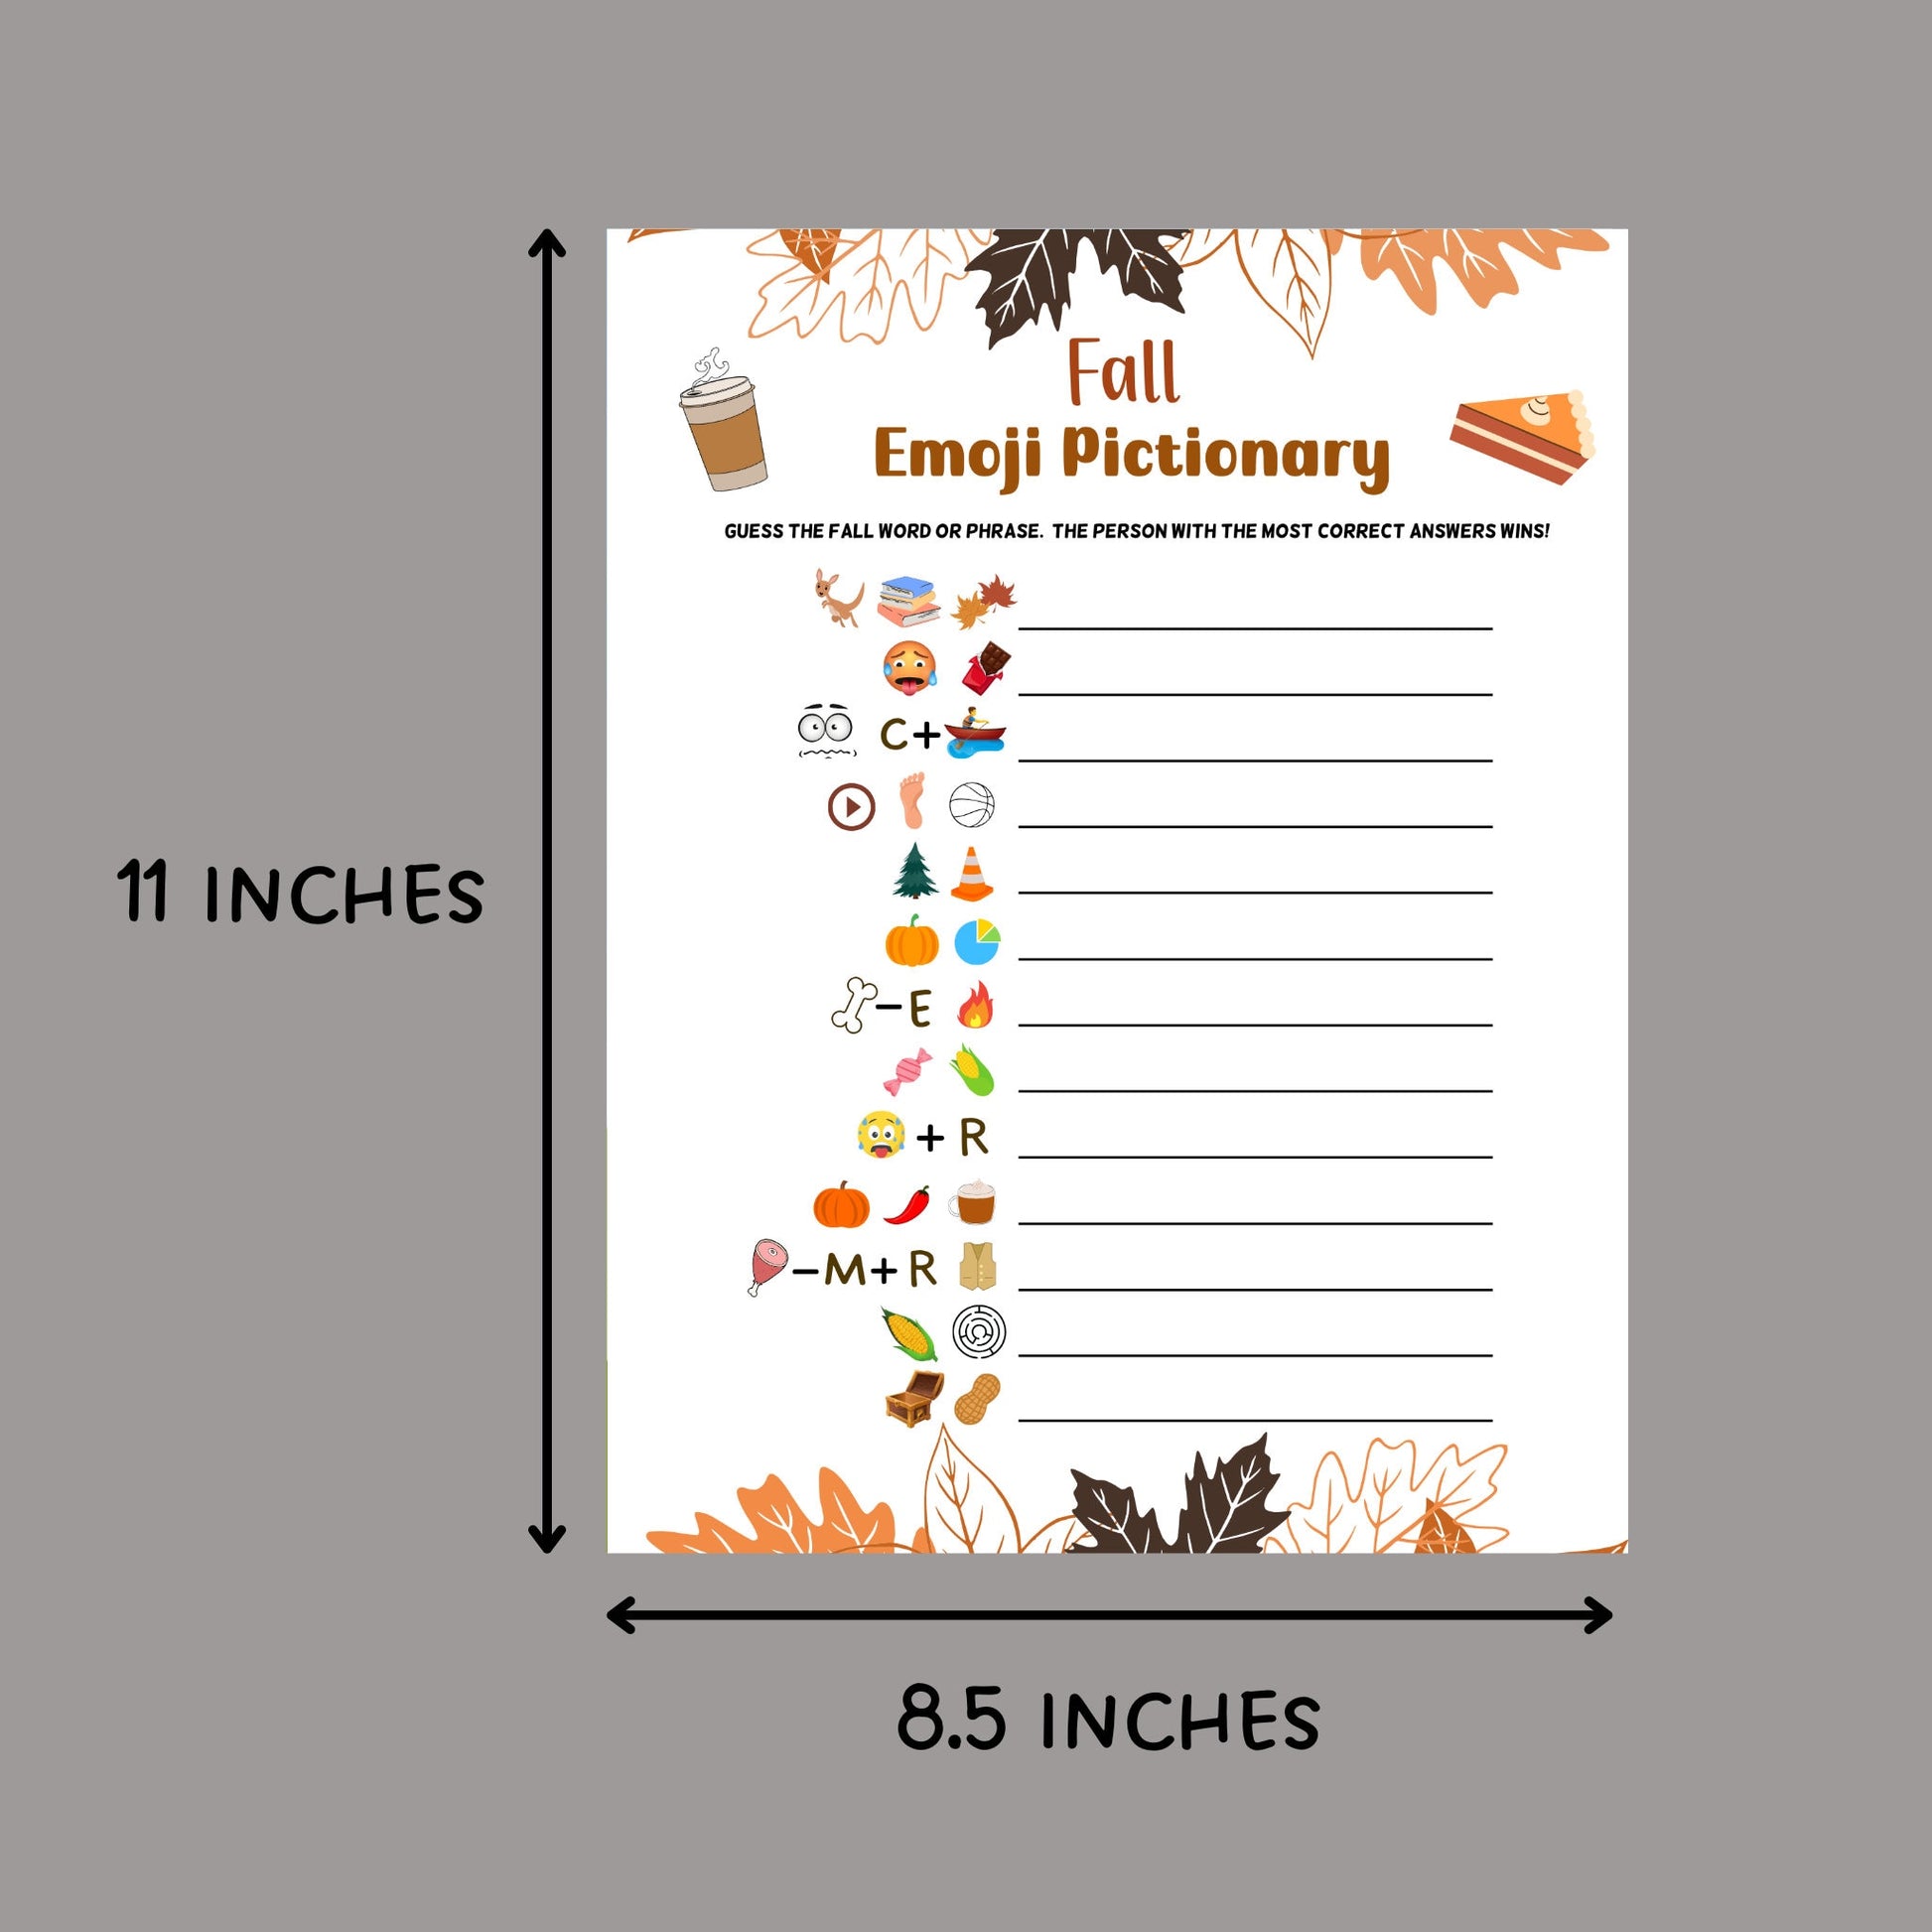 Fall Emoji Pictionary Game Printable, Fun Autumn Games, Emoji Game, Fall Time Activities for Adults & Kids, Family Activity Thanksgiving